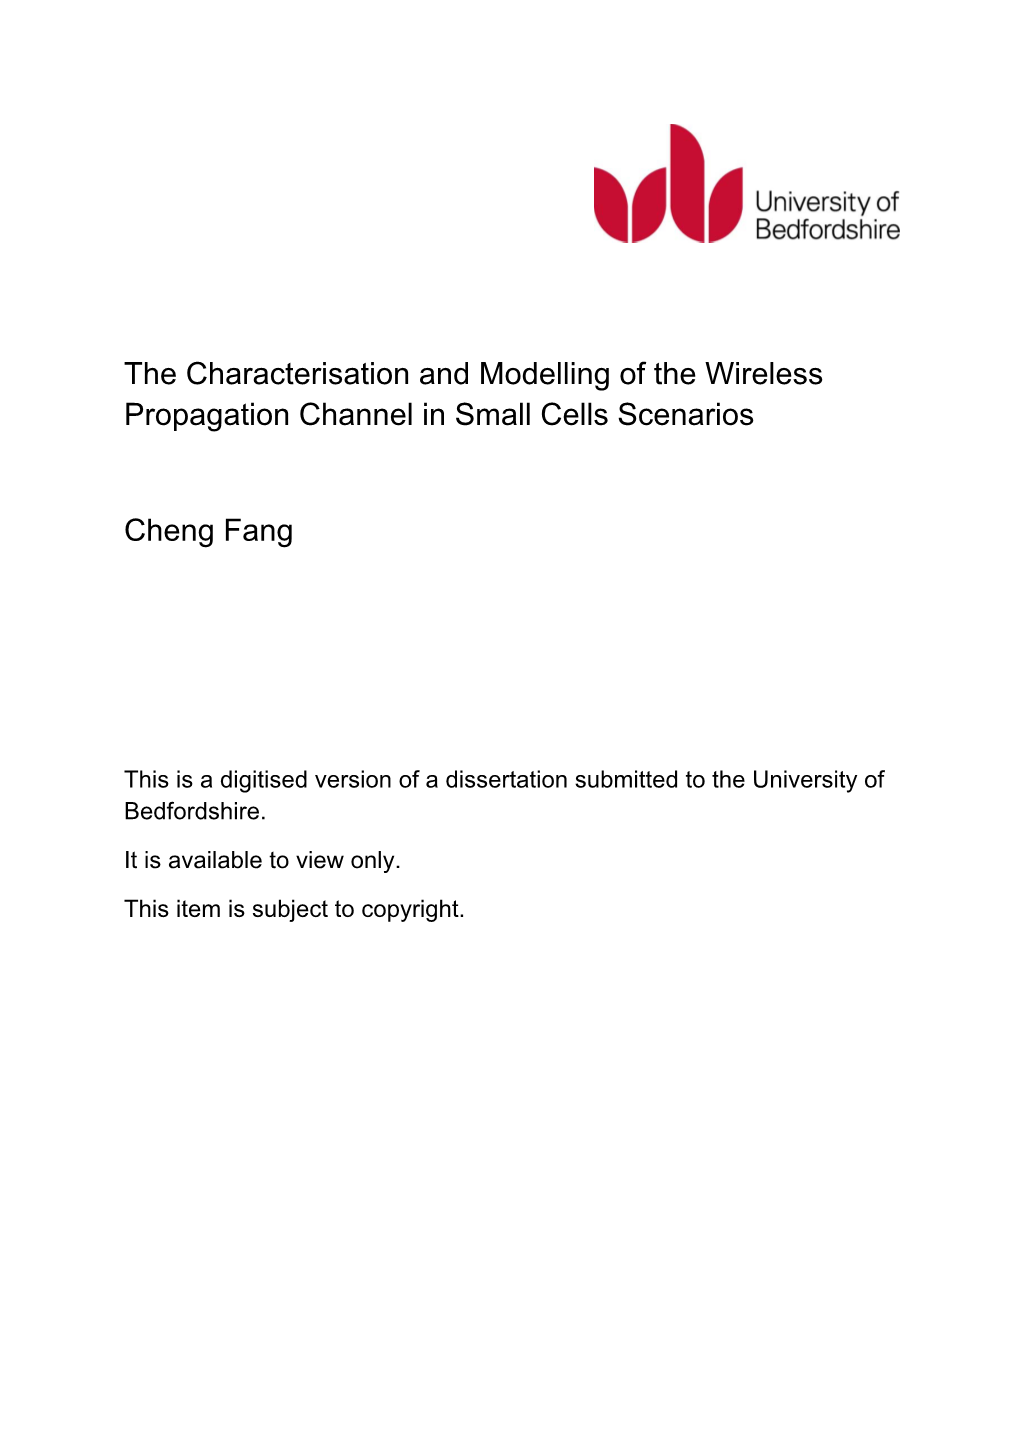 The Characterisation and Modelling of the Wireless Propagation Channel in Small Cells Scenarios